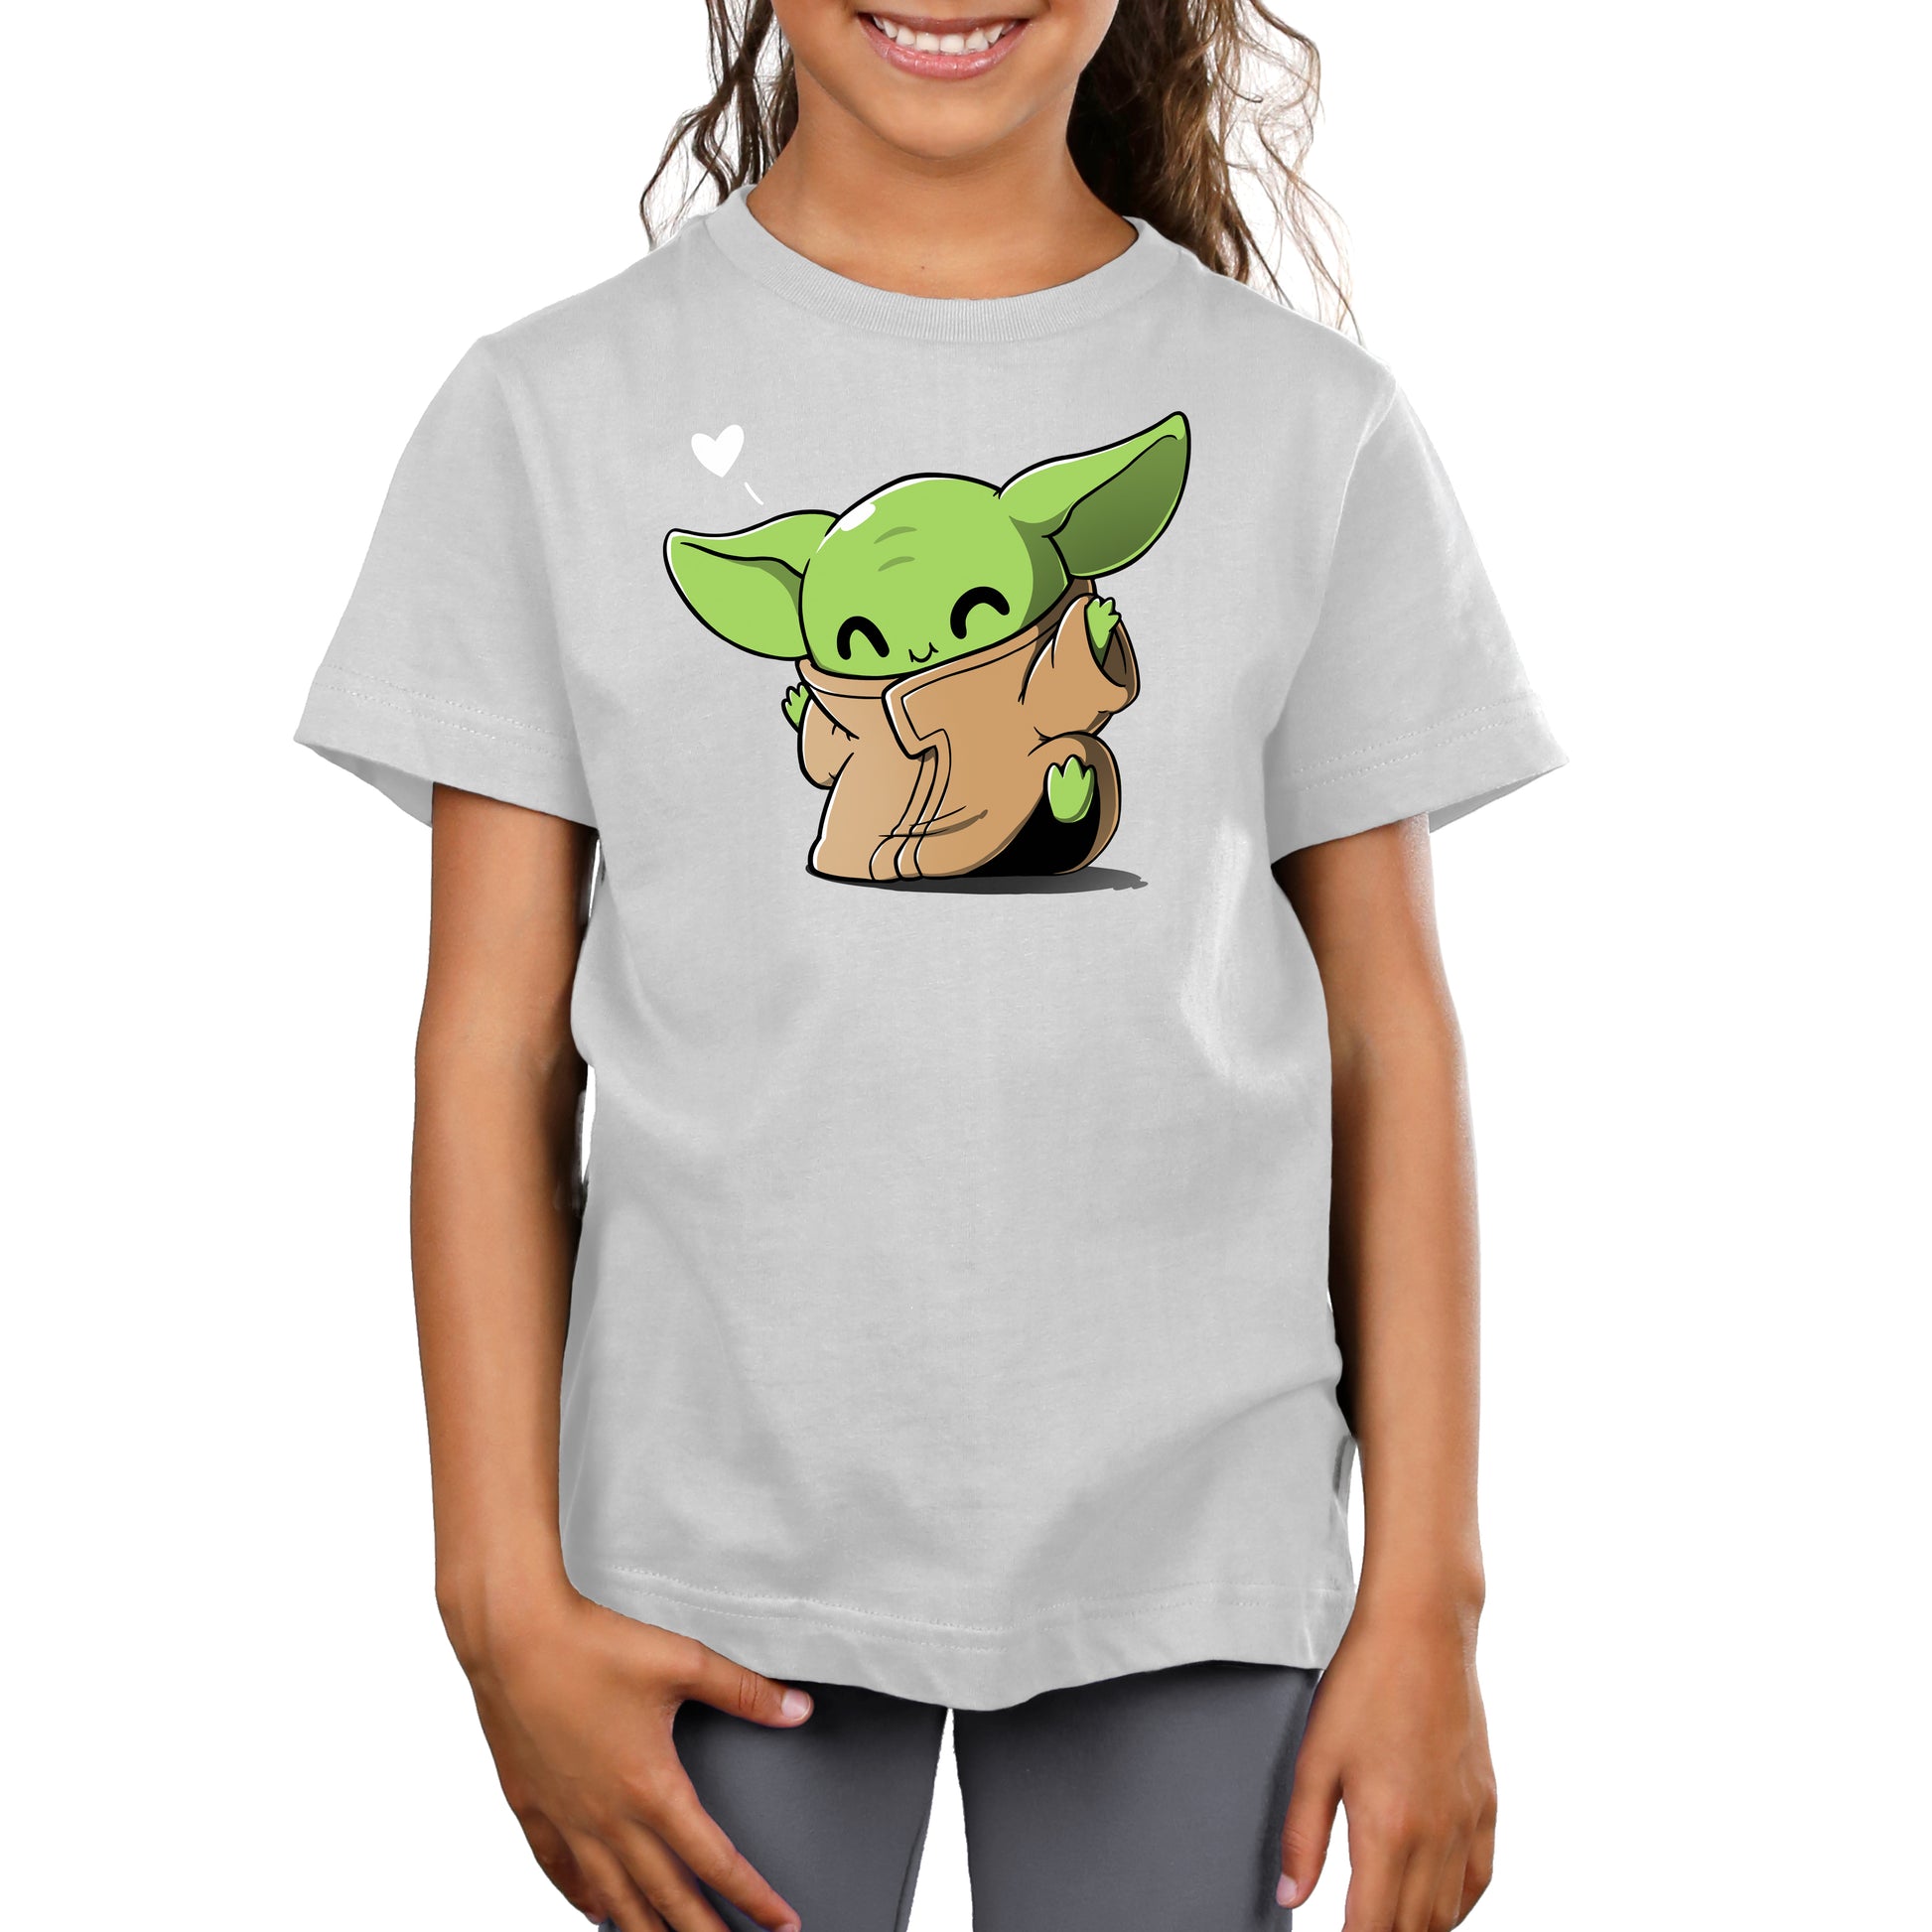 Officially Licensed Star Wars t-shirt featuring Happy Dance, also known as baby Yoda.